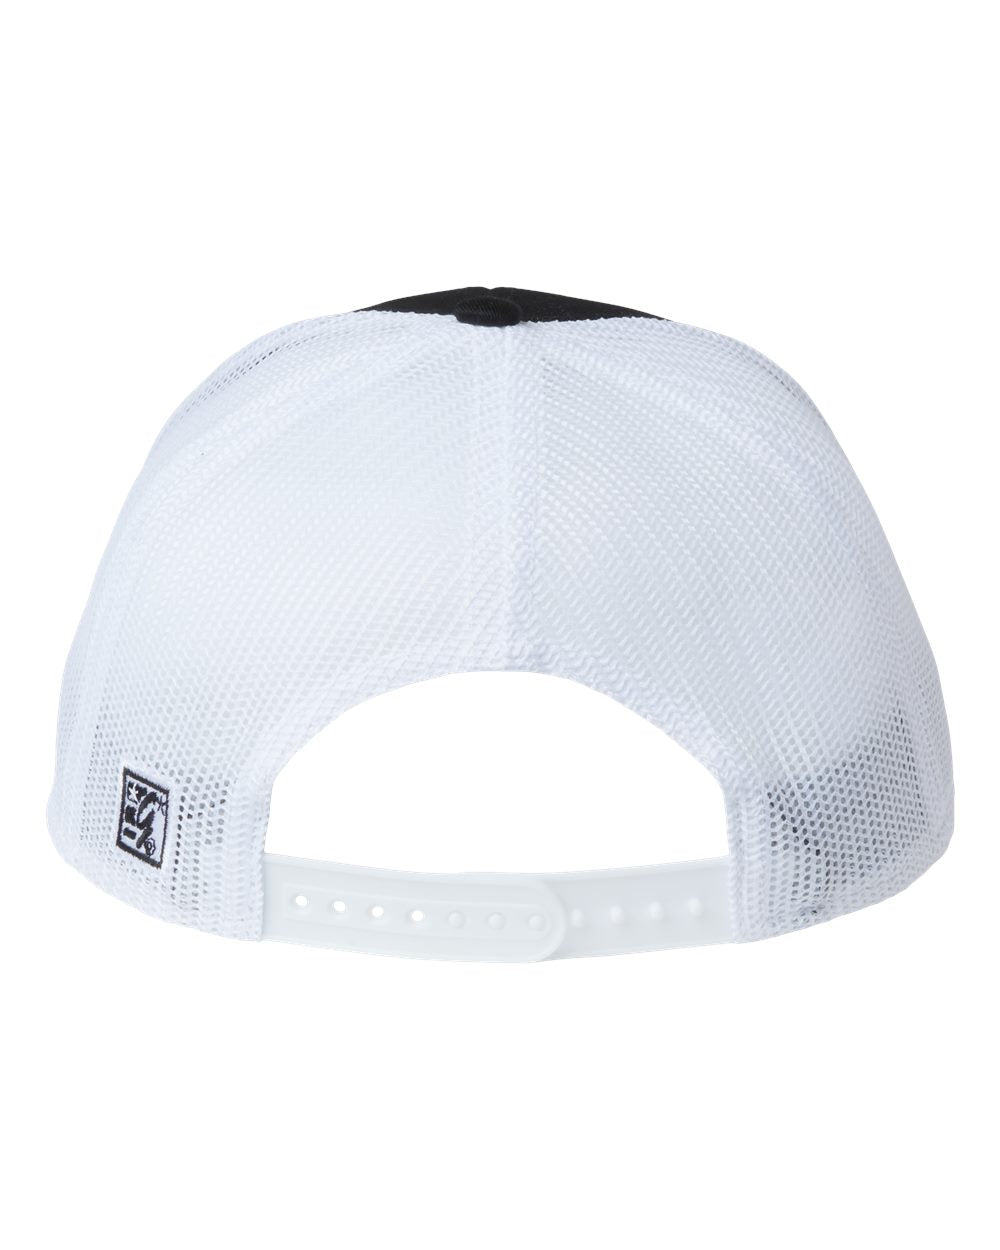 The Game Everyday Rope Trucker Cap GB452R #color_Black/ White